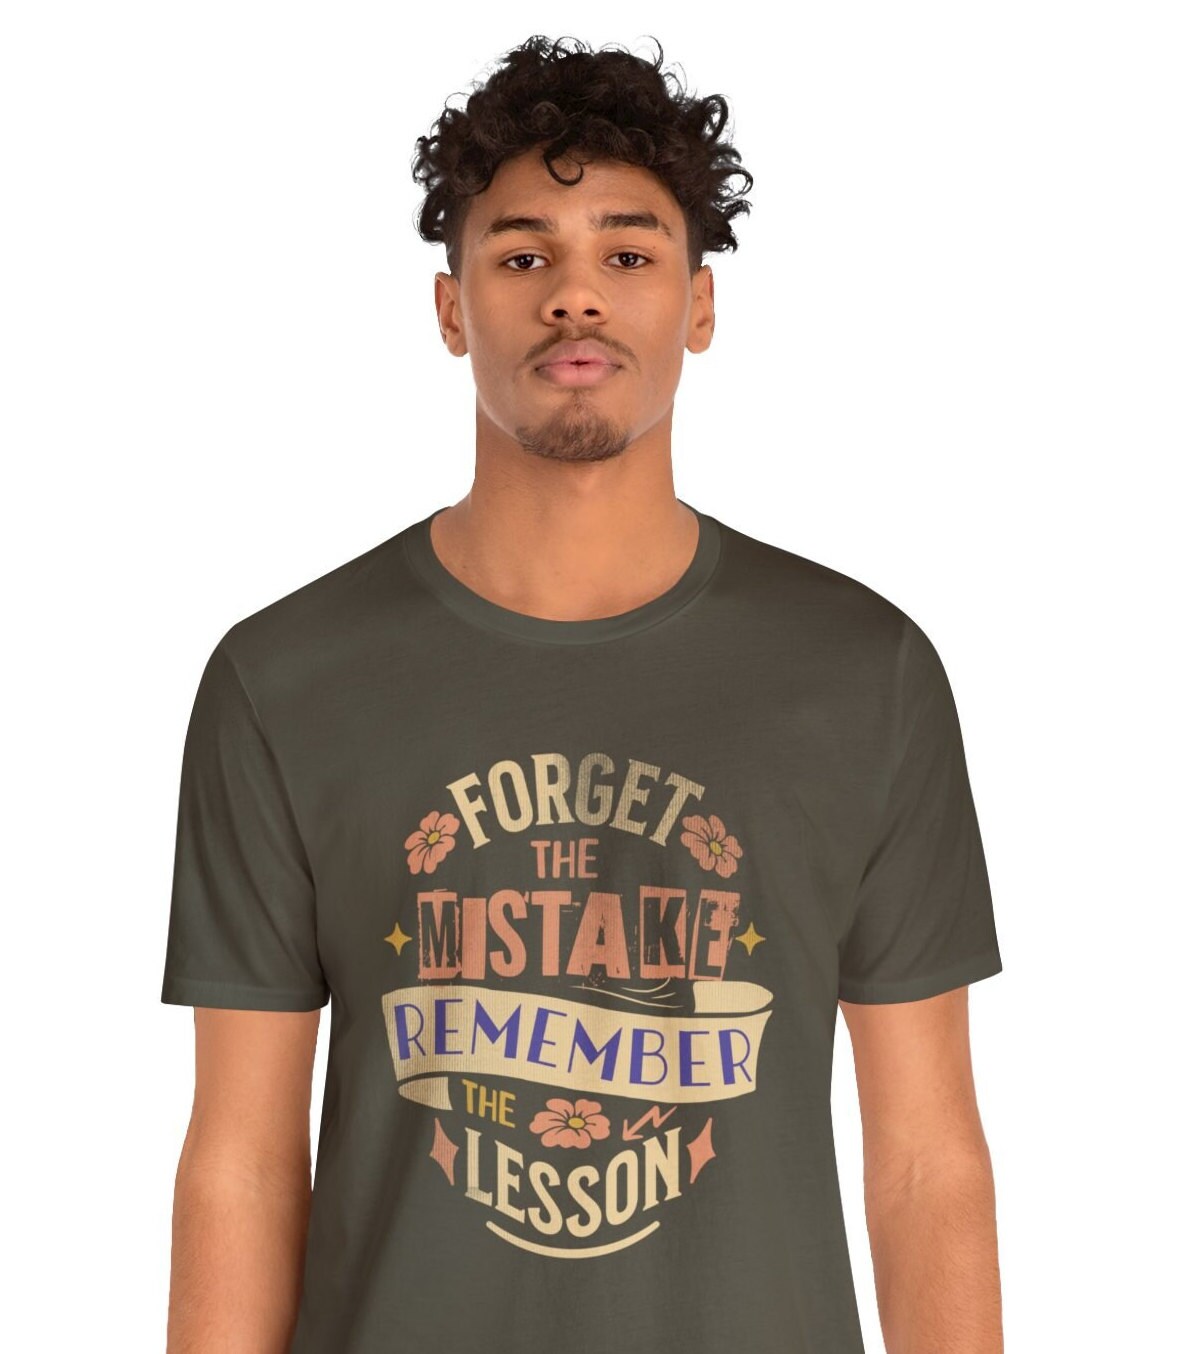 Forget the Mistake Remember the Lesson shirt, Mental Health T-shirt, Positive Tee